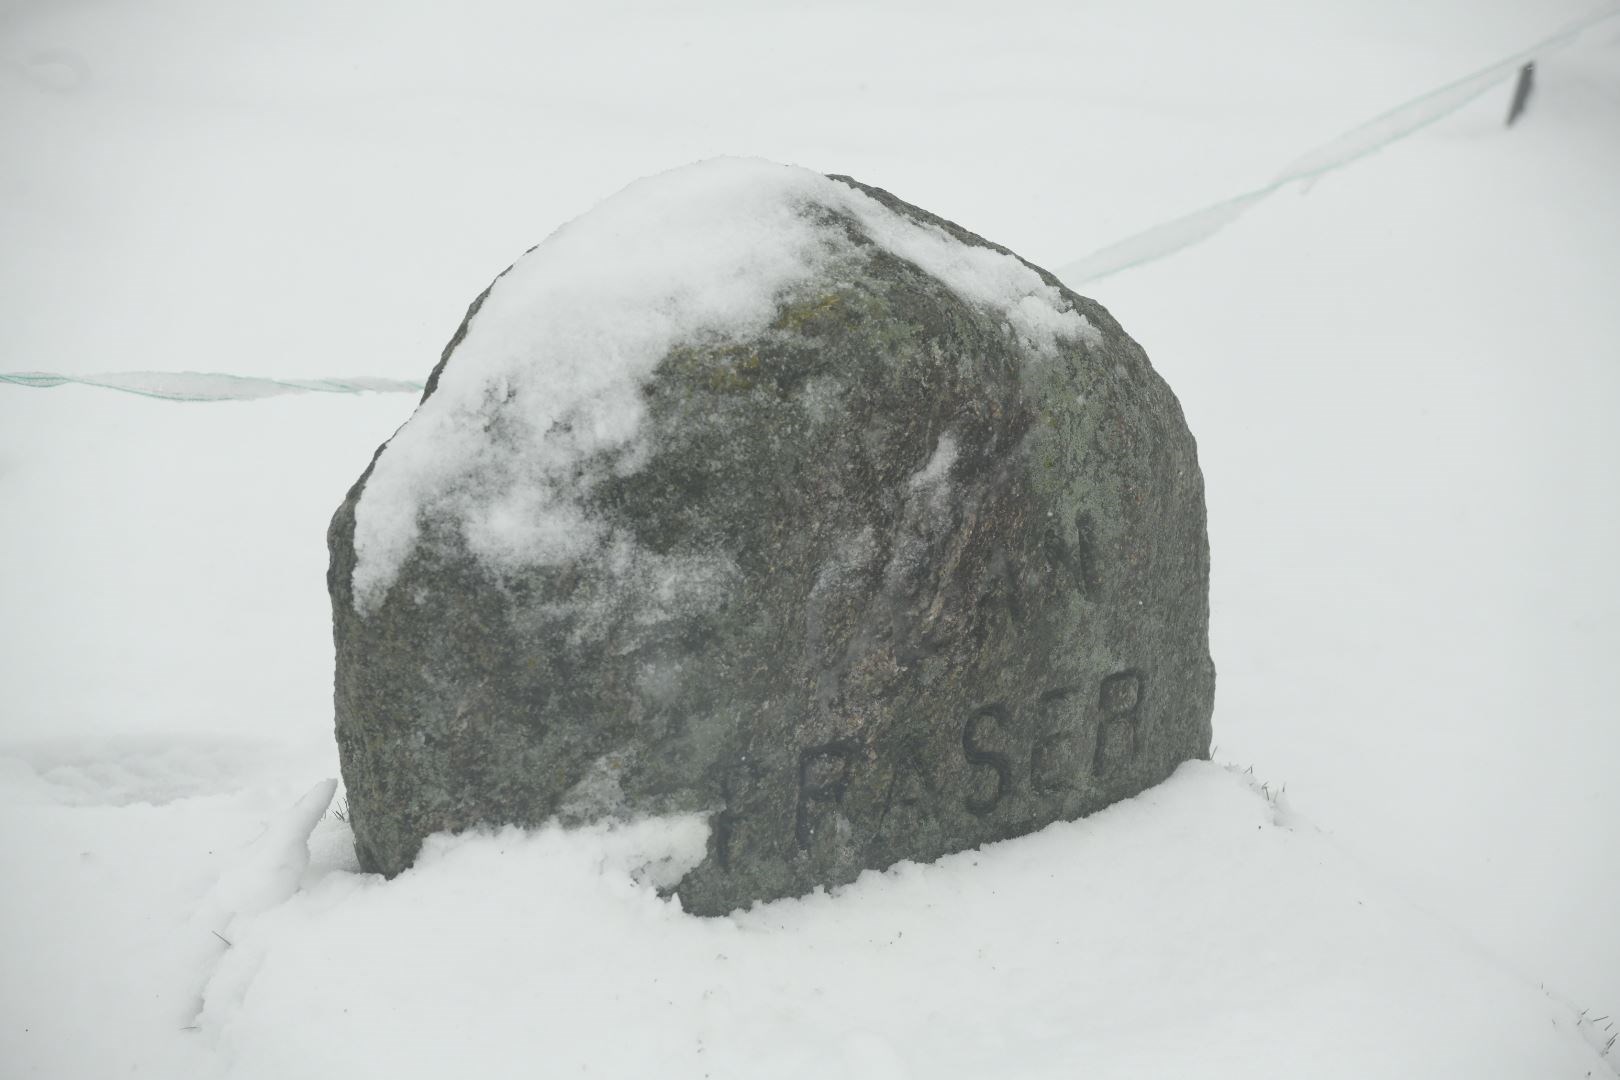 The Clan Fraser stone at Culloden Battlefield.